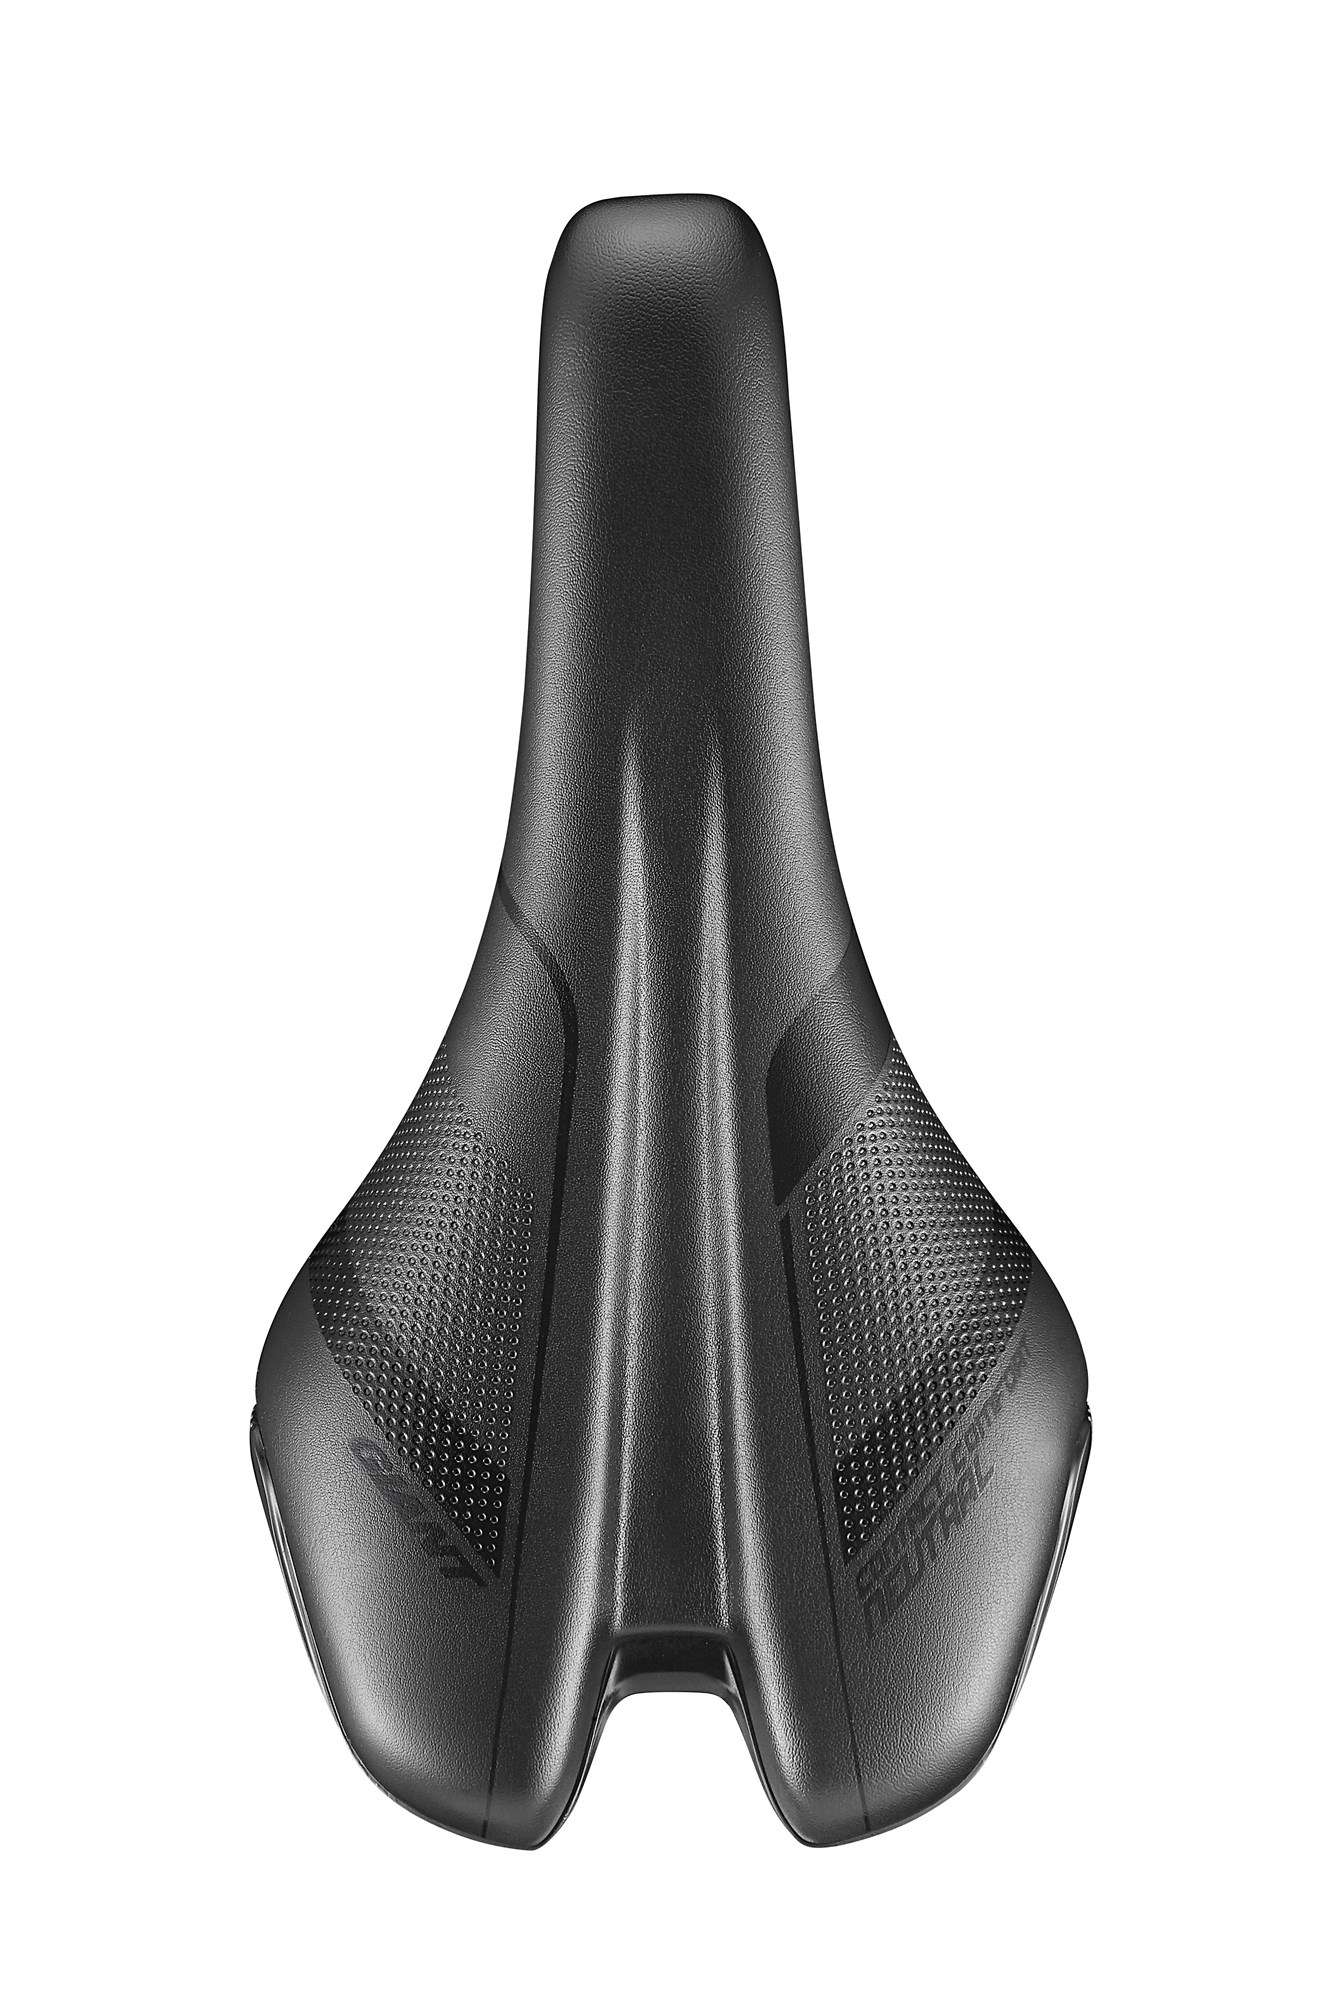 giant connect comfort saddle